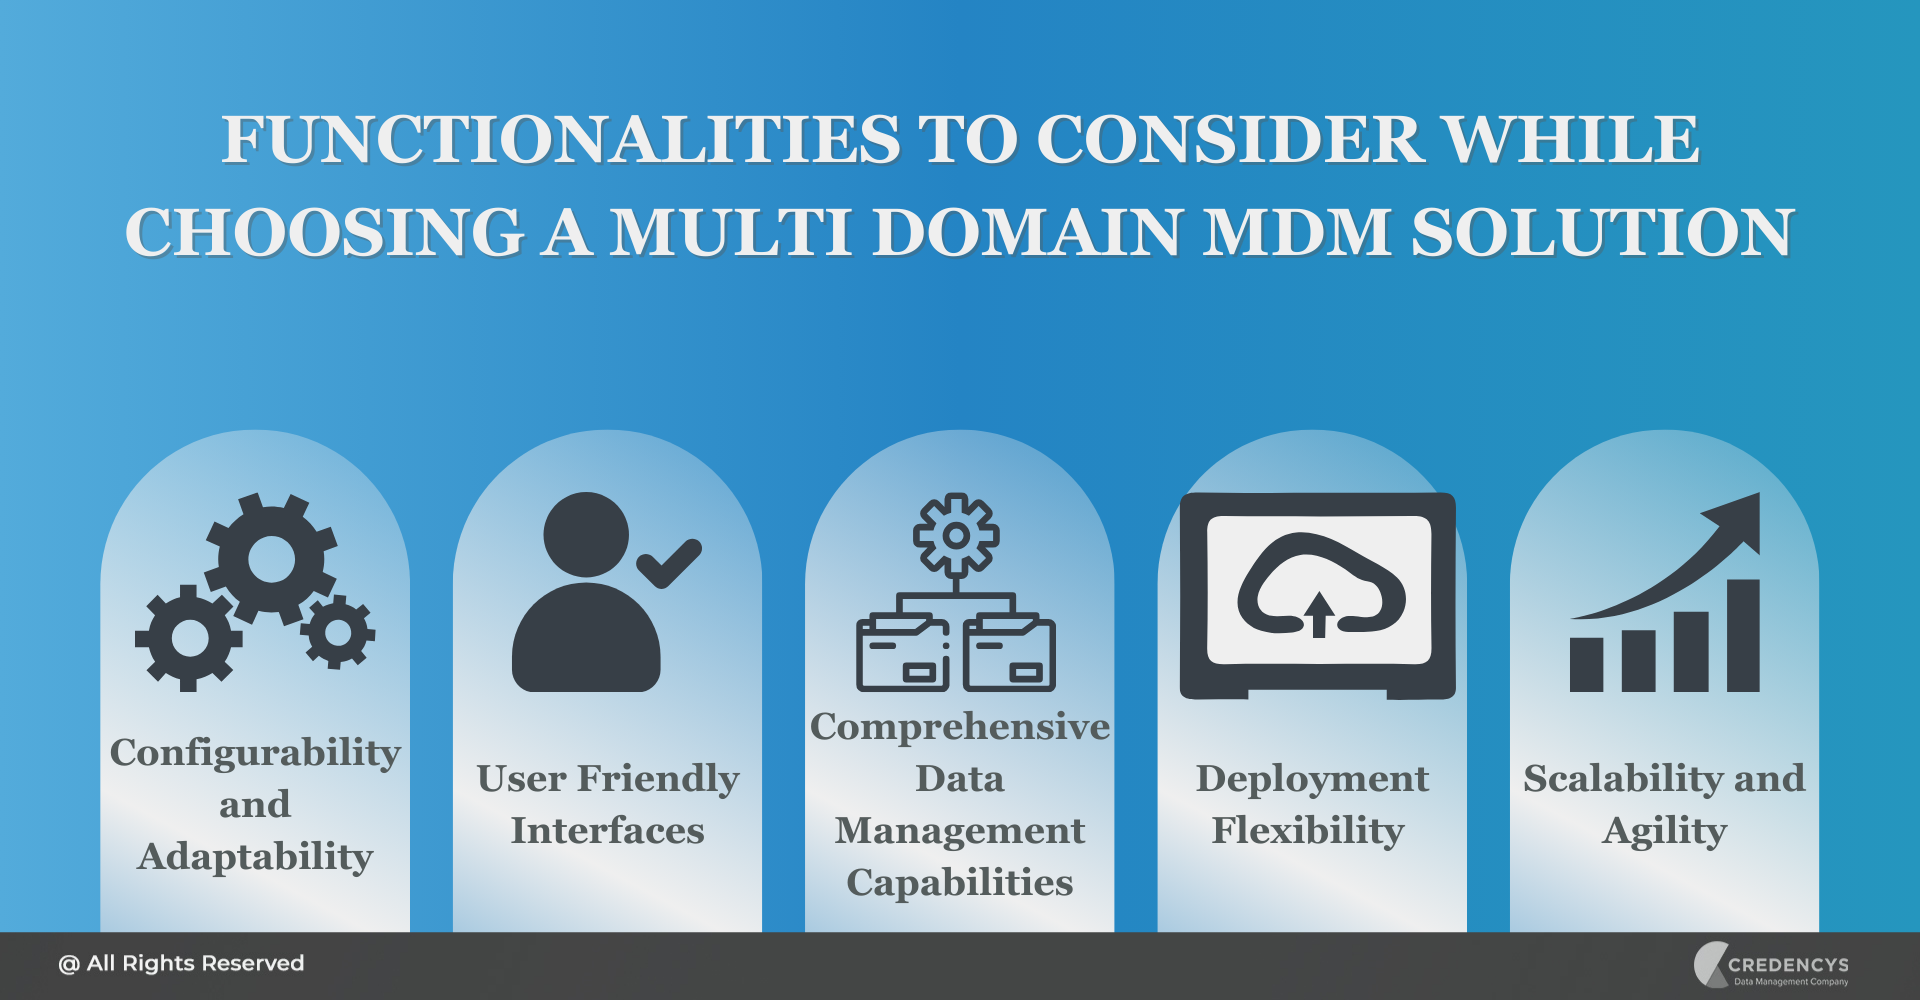 Functionalities to Consider While Choosing a Multi Domain MDM Solution